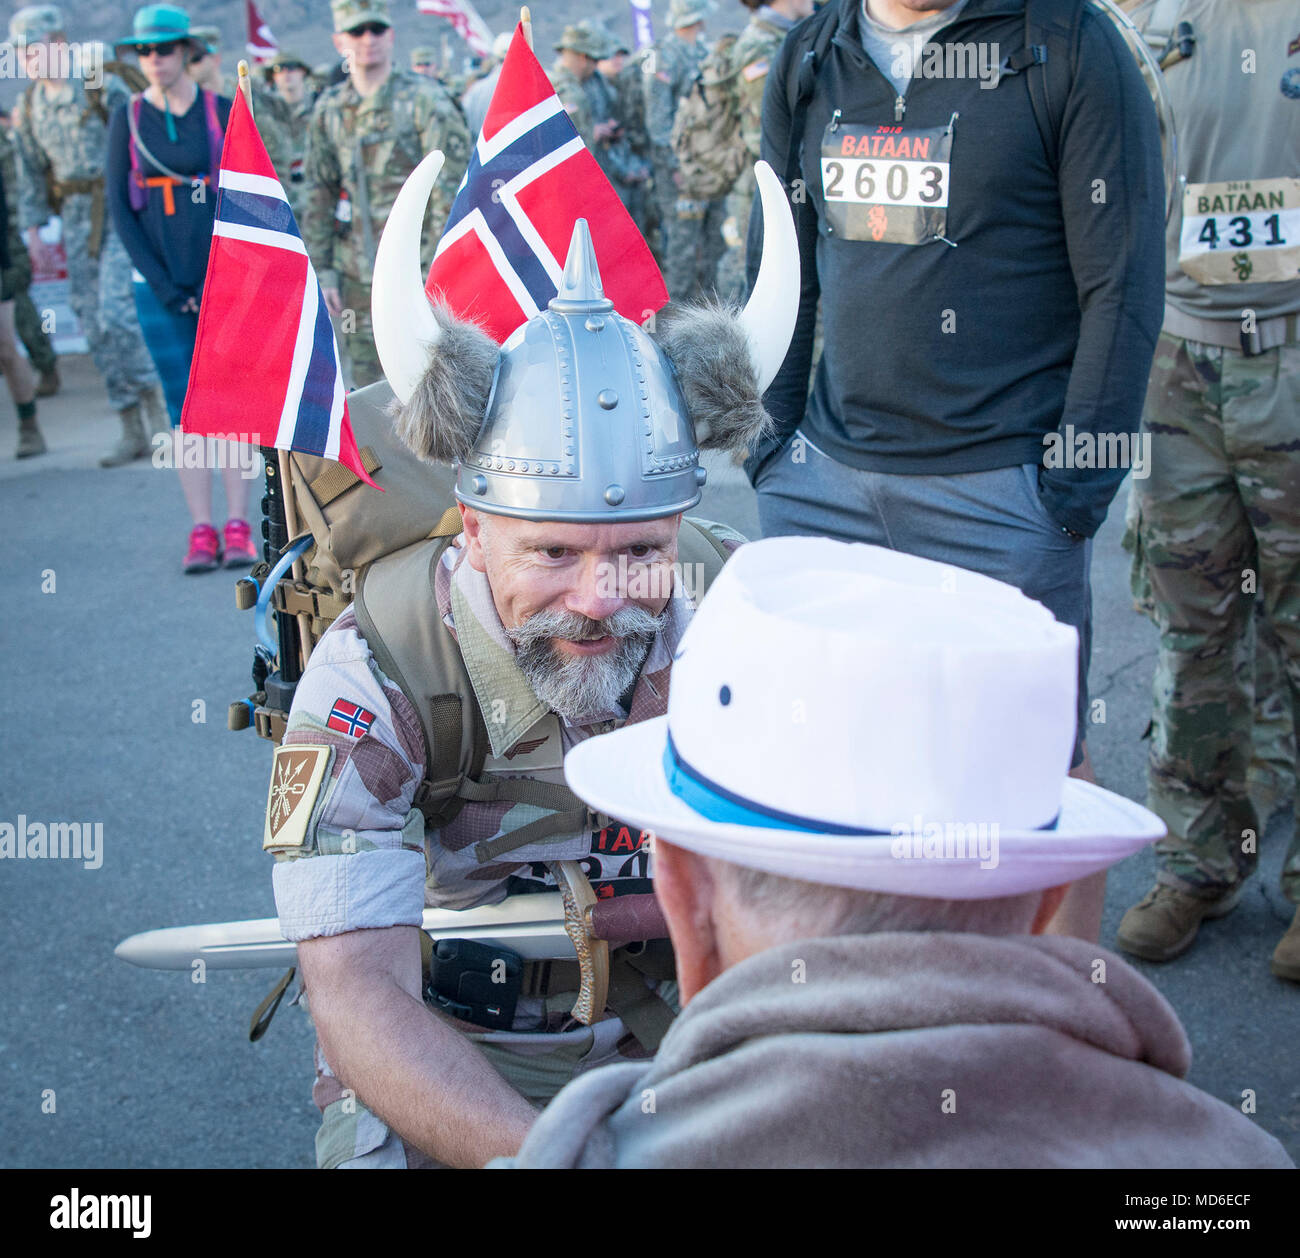 Jorg Lian, a Norwegian Army officer who recieved the War Cross with Swords, Norway’s highest award for bravery in combat, on May 8, 2011 “to have demonstrated particularly outstanding bravery and leadership during international operations in Afghanistan in 2009” greets 100-year-old Bataan Death March survivor Col. Ben Skardon, a beloved Clemson University alumnus and professor emeritus, before the Bataan Memorial Death March at White Sands Missile Range, N.M., March 25, 2018. (Photo by Ken Scar) Stock Photo